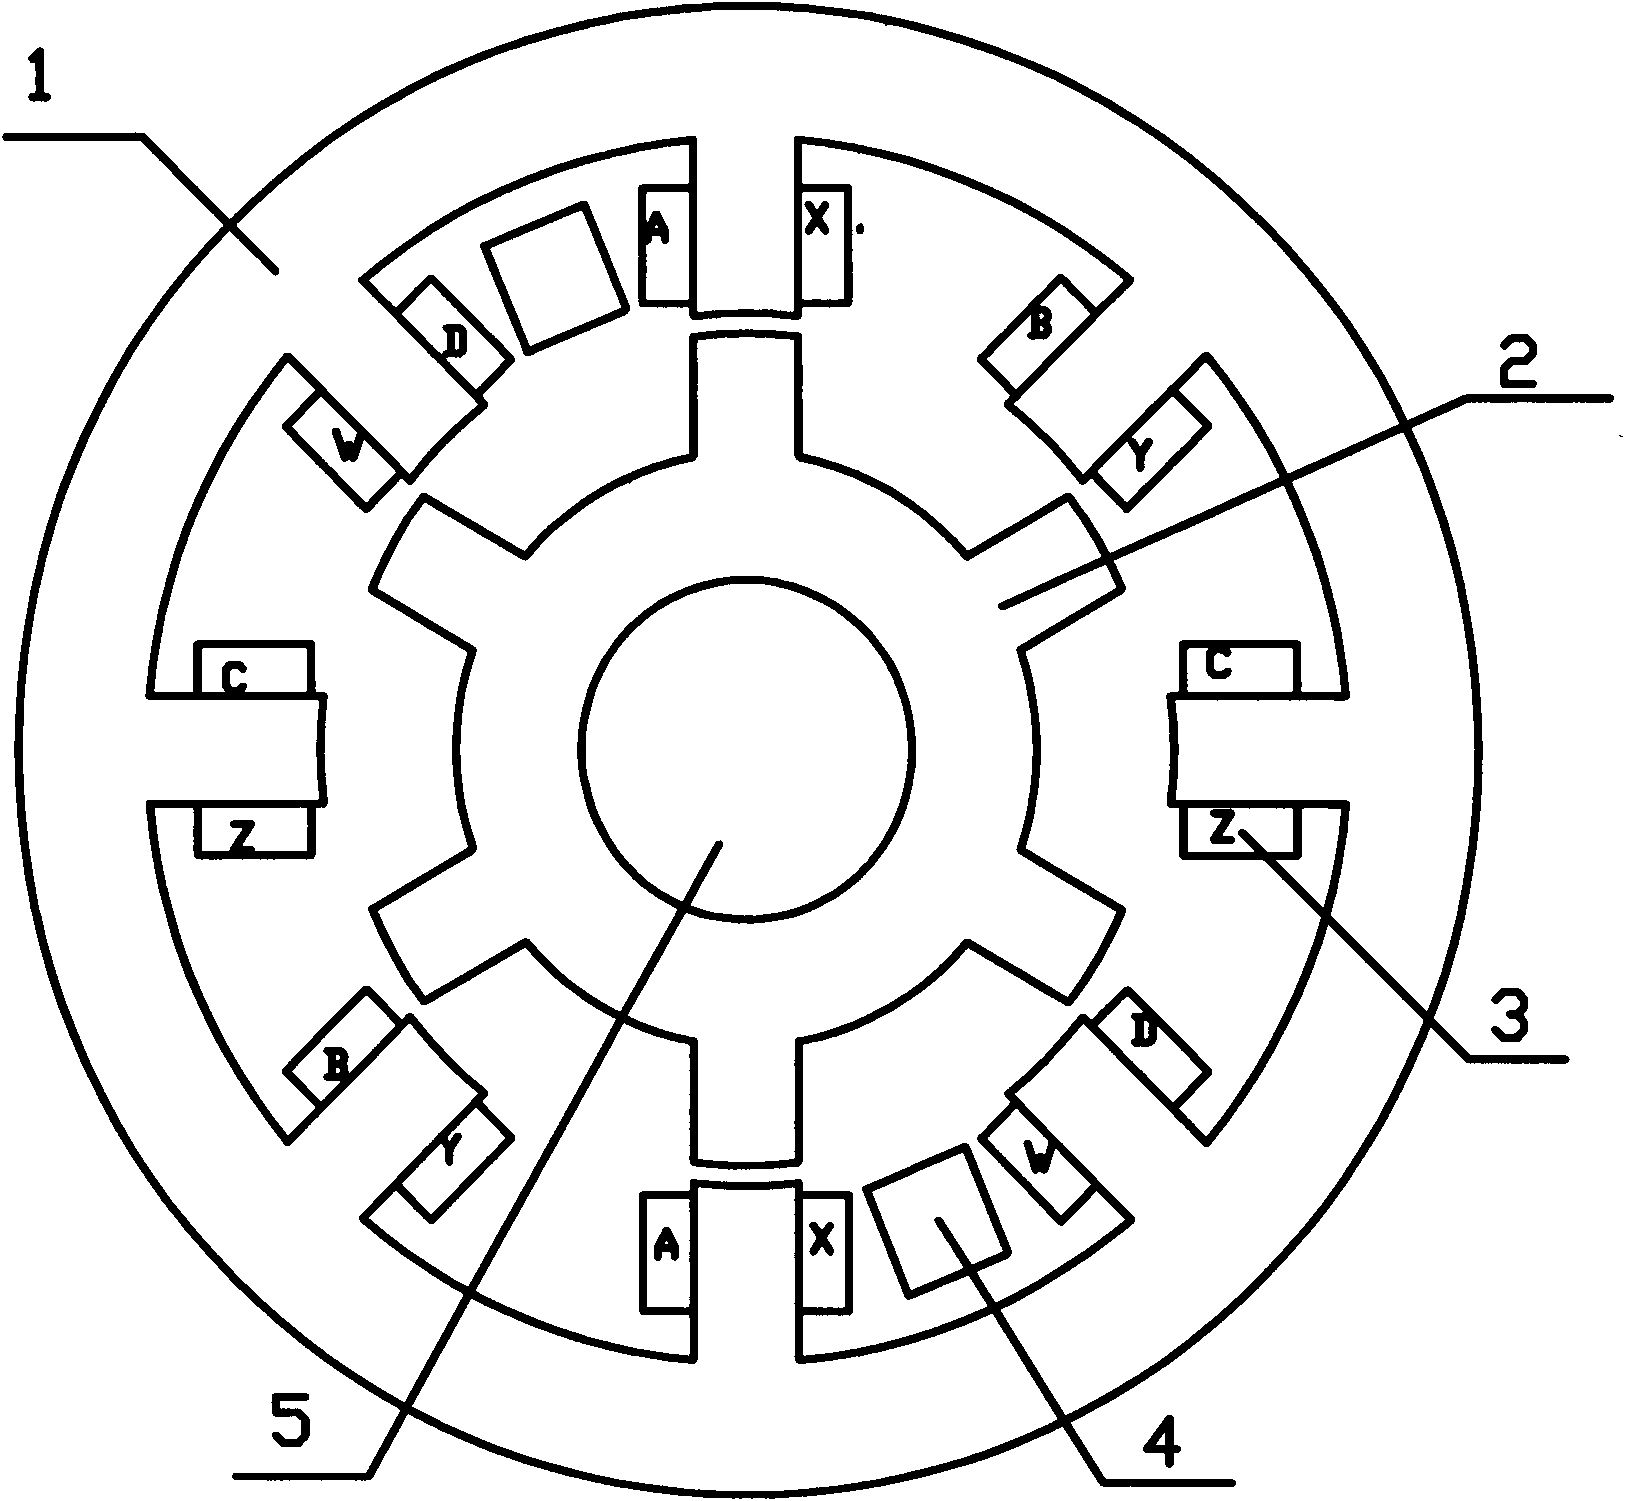 Four-phase doubly salient motor